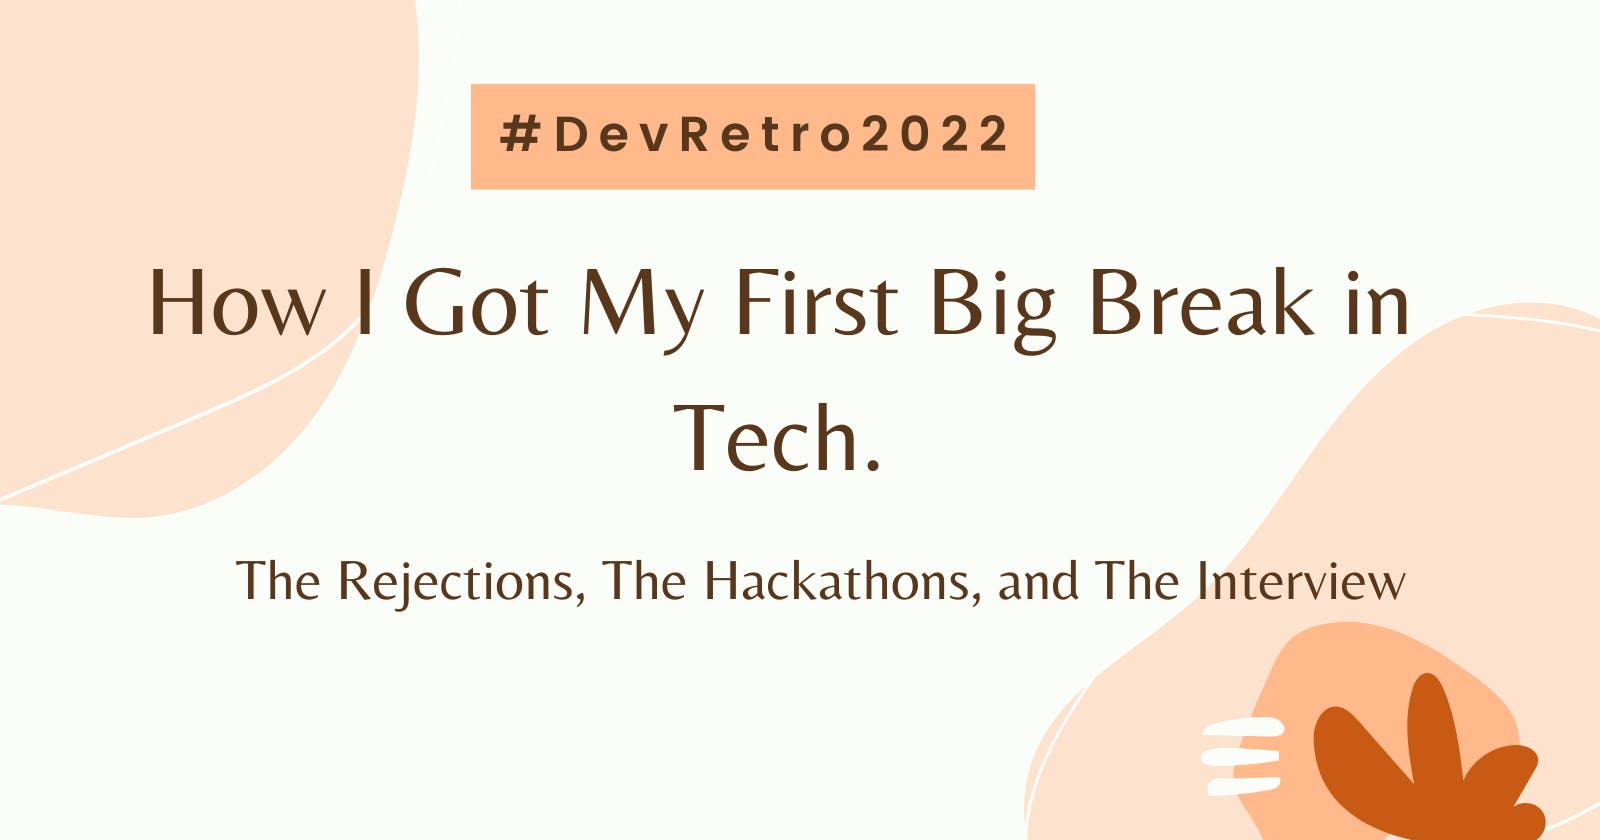 Dev Retro 2022: How I Got My First Big Break in Tech. The Rejections, The Hackathons, and The Interview